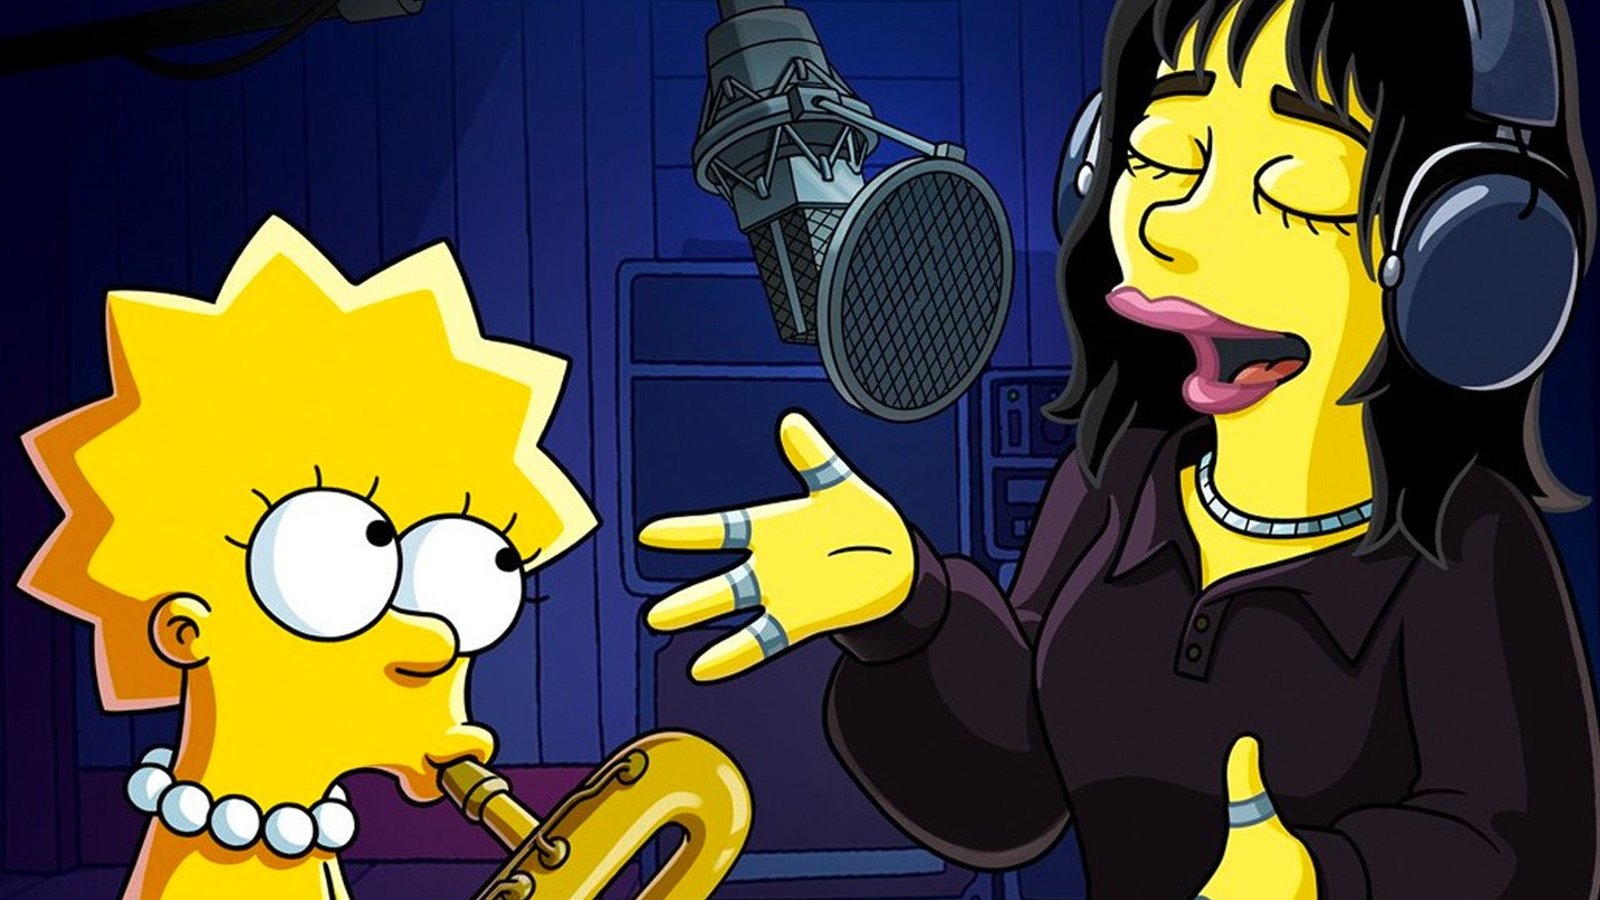 Billie Eilish Will Appear in a Unusual Simpsons Quick to Jam With Lisa